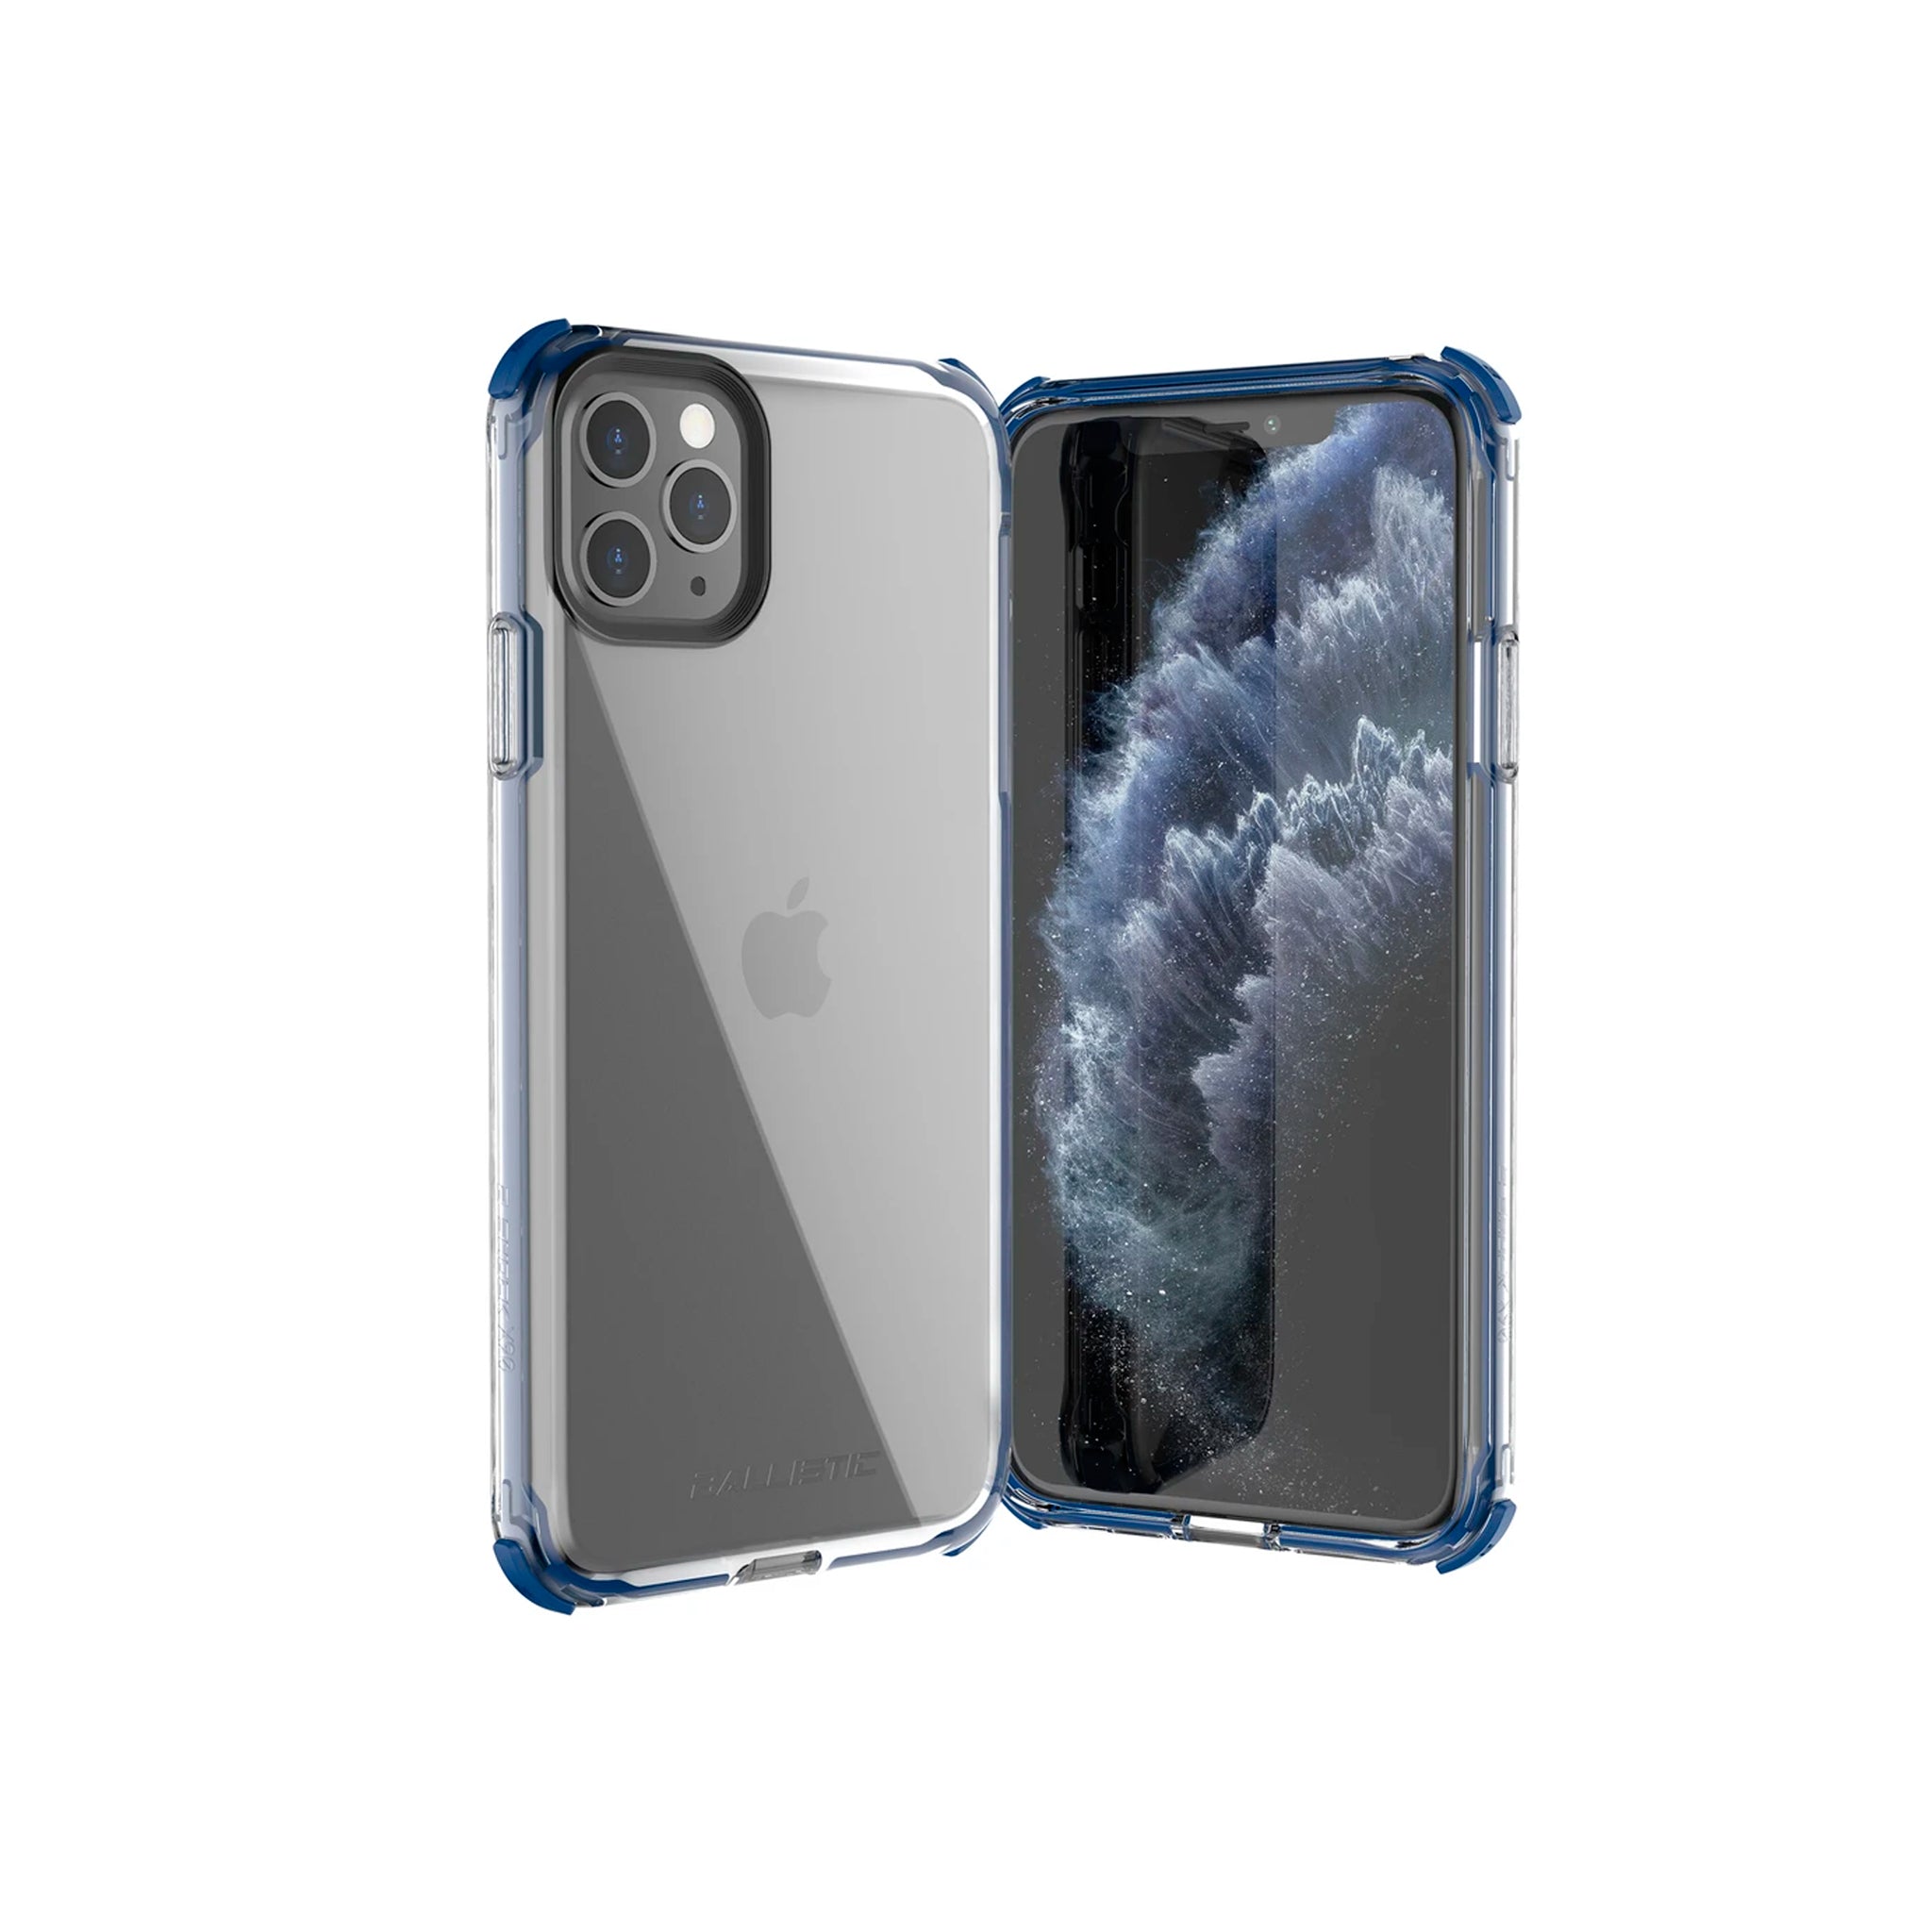 Ballistic - Bshock X90 Series For iPhone 11 Pro Max  - Blue